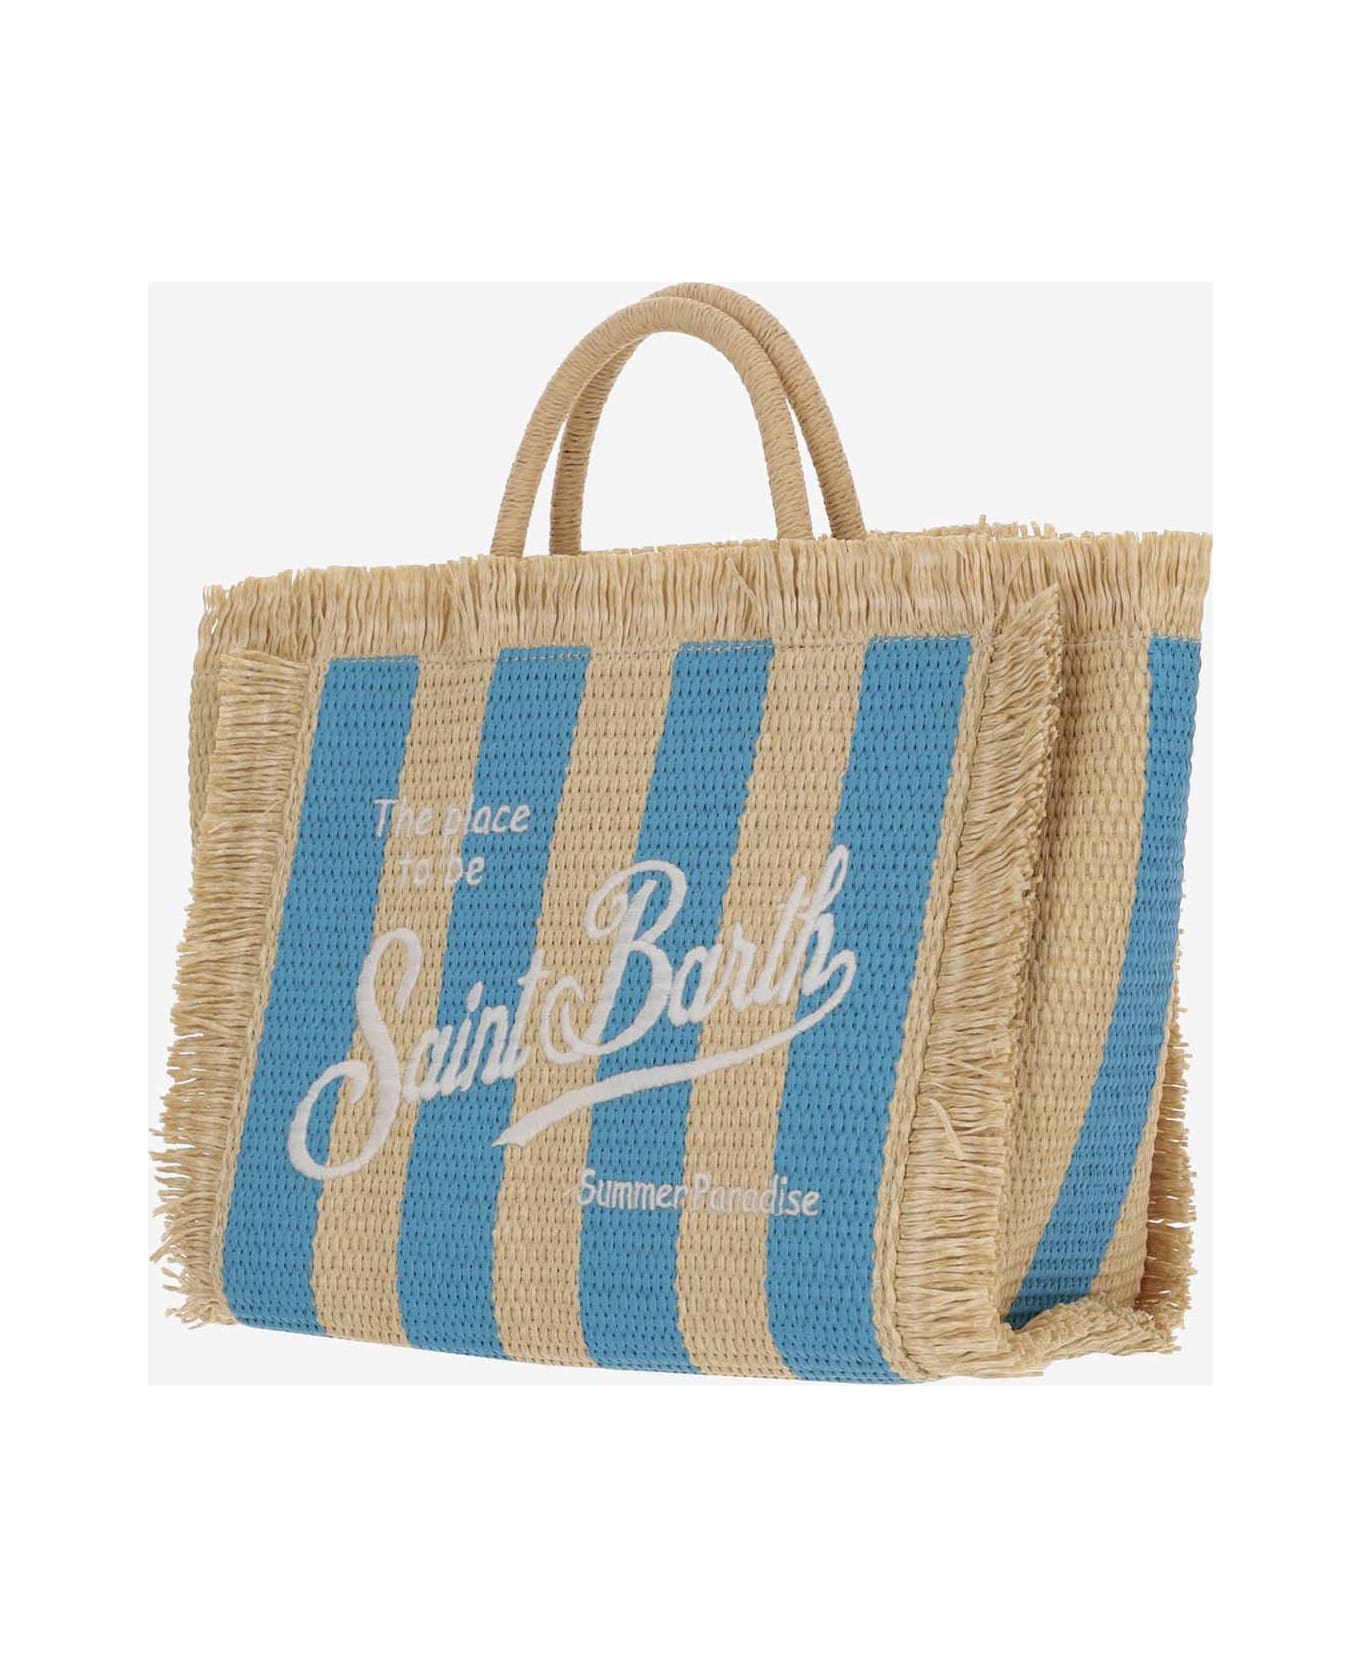 MC2 Saint Barth Colette Tote Bag With Striped Pattern - Red トートバッグ